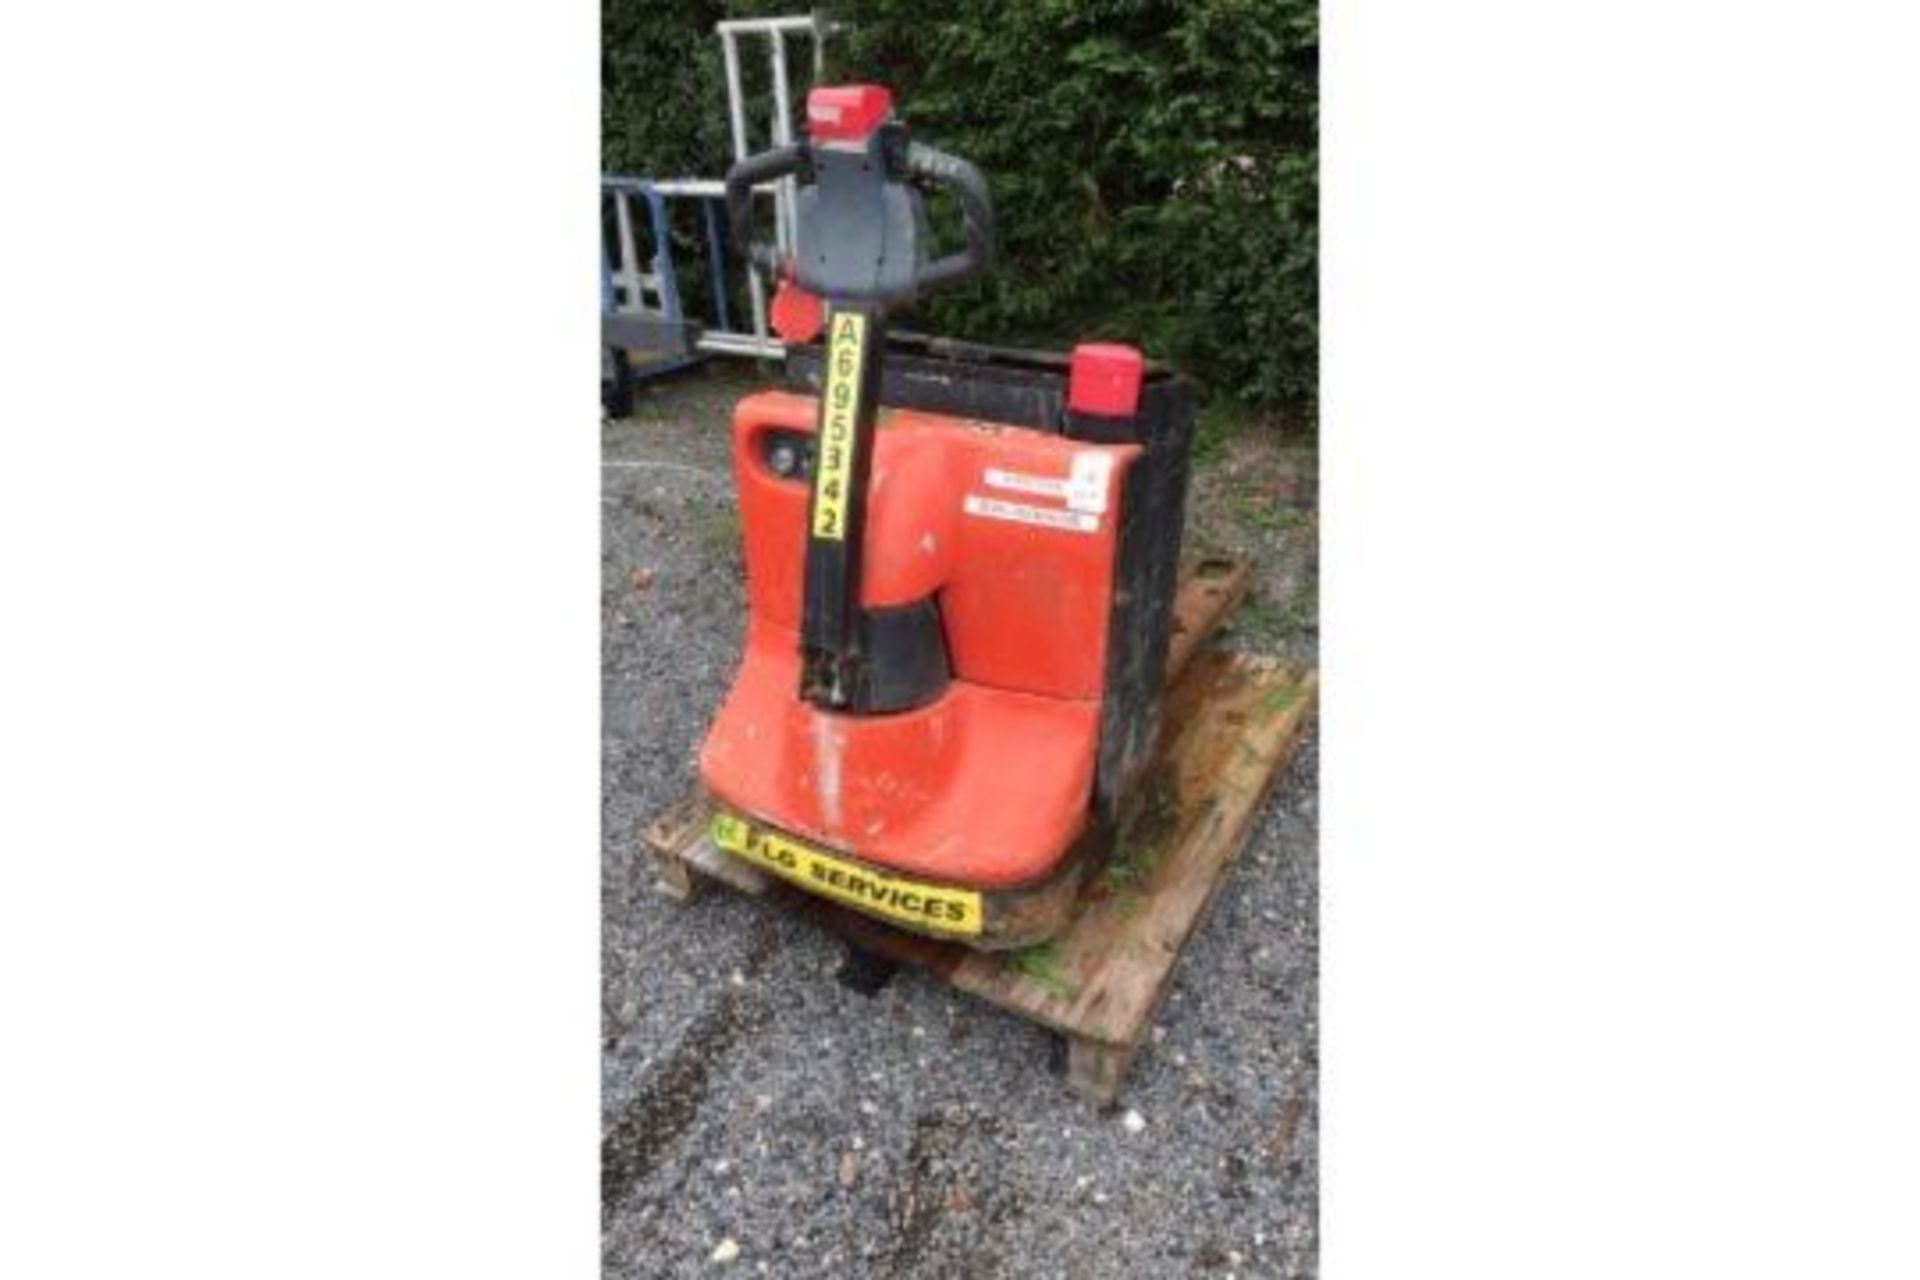 Electric Pallet Truck 2000kg (A695342) - Image 4 of 5